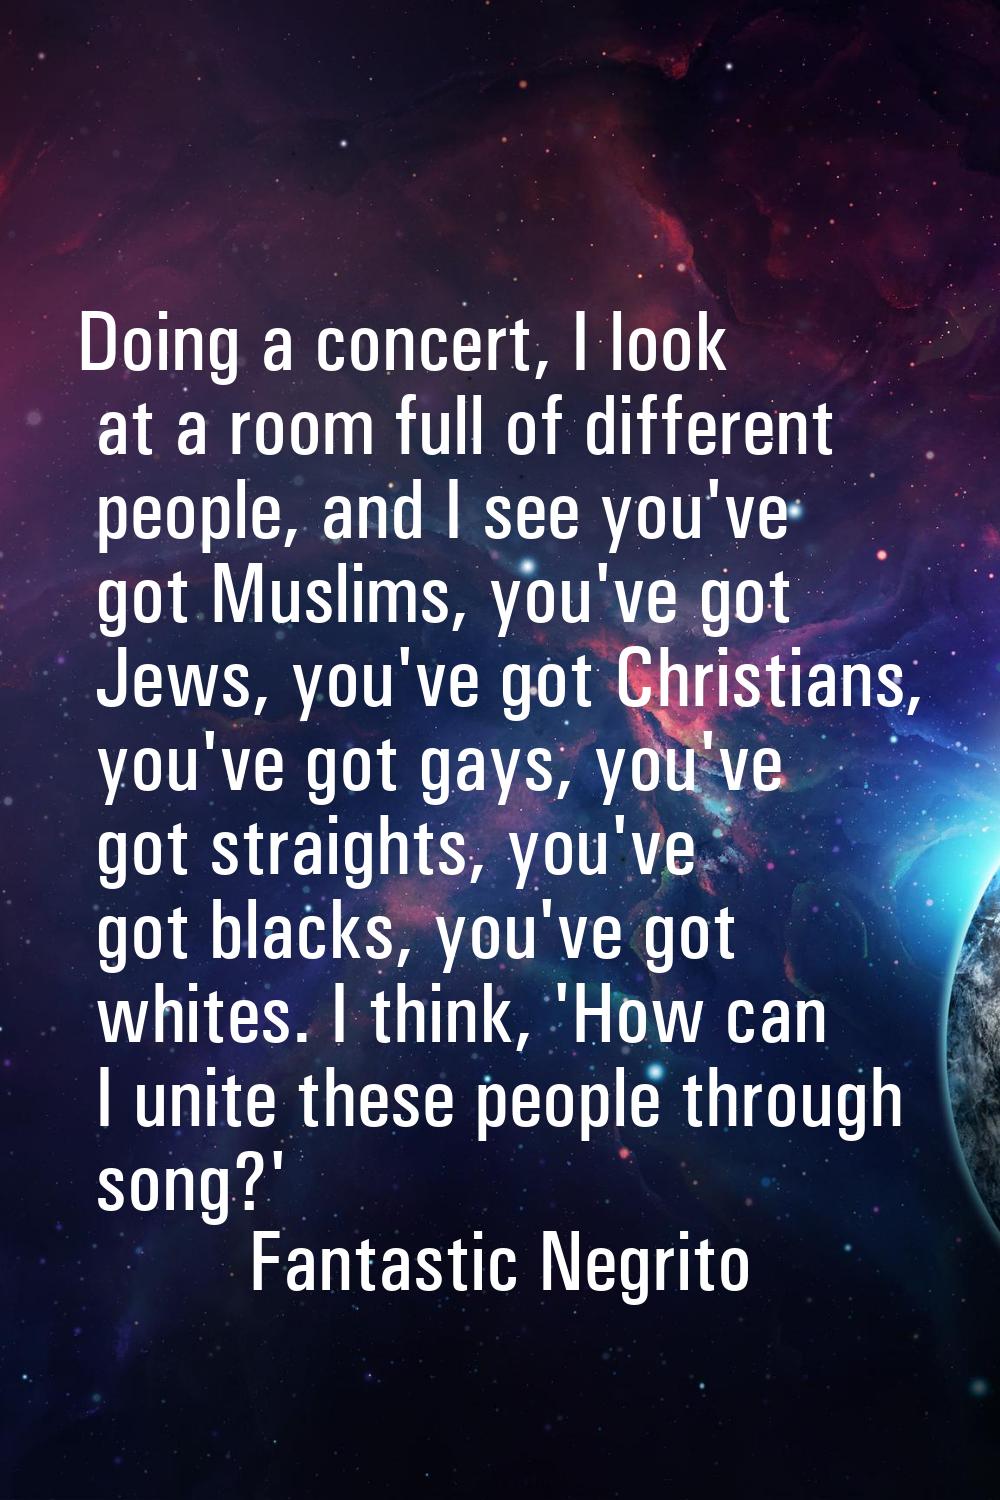 Doing a concert, I look at a room full of different people, and I see you've got Muslims, you've go